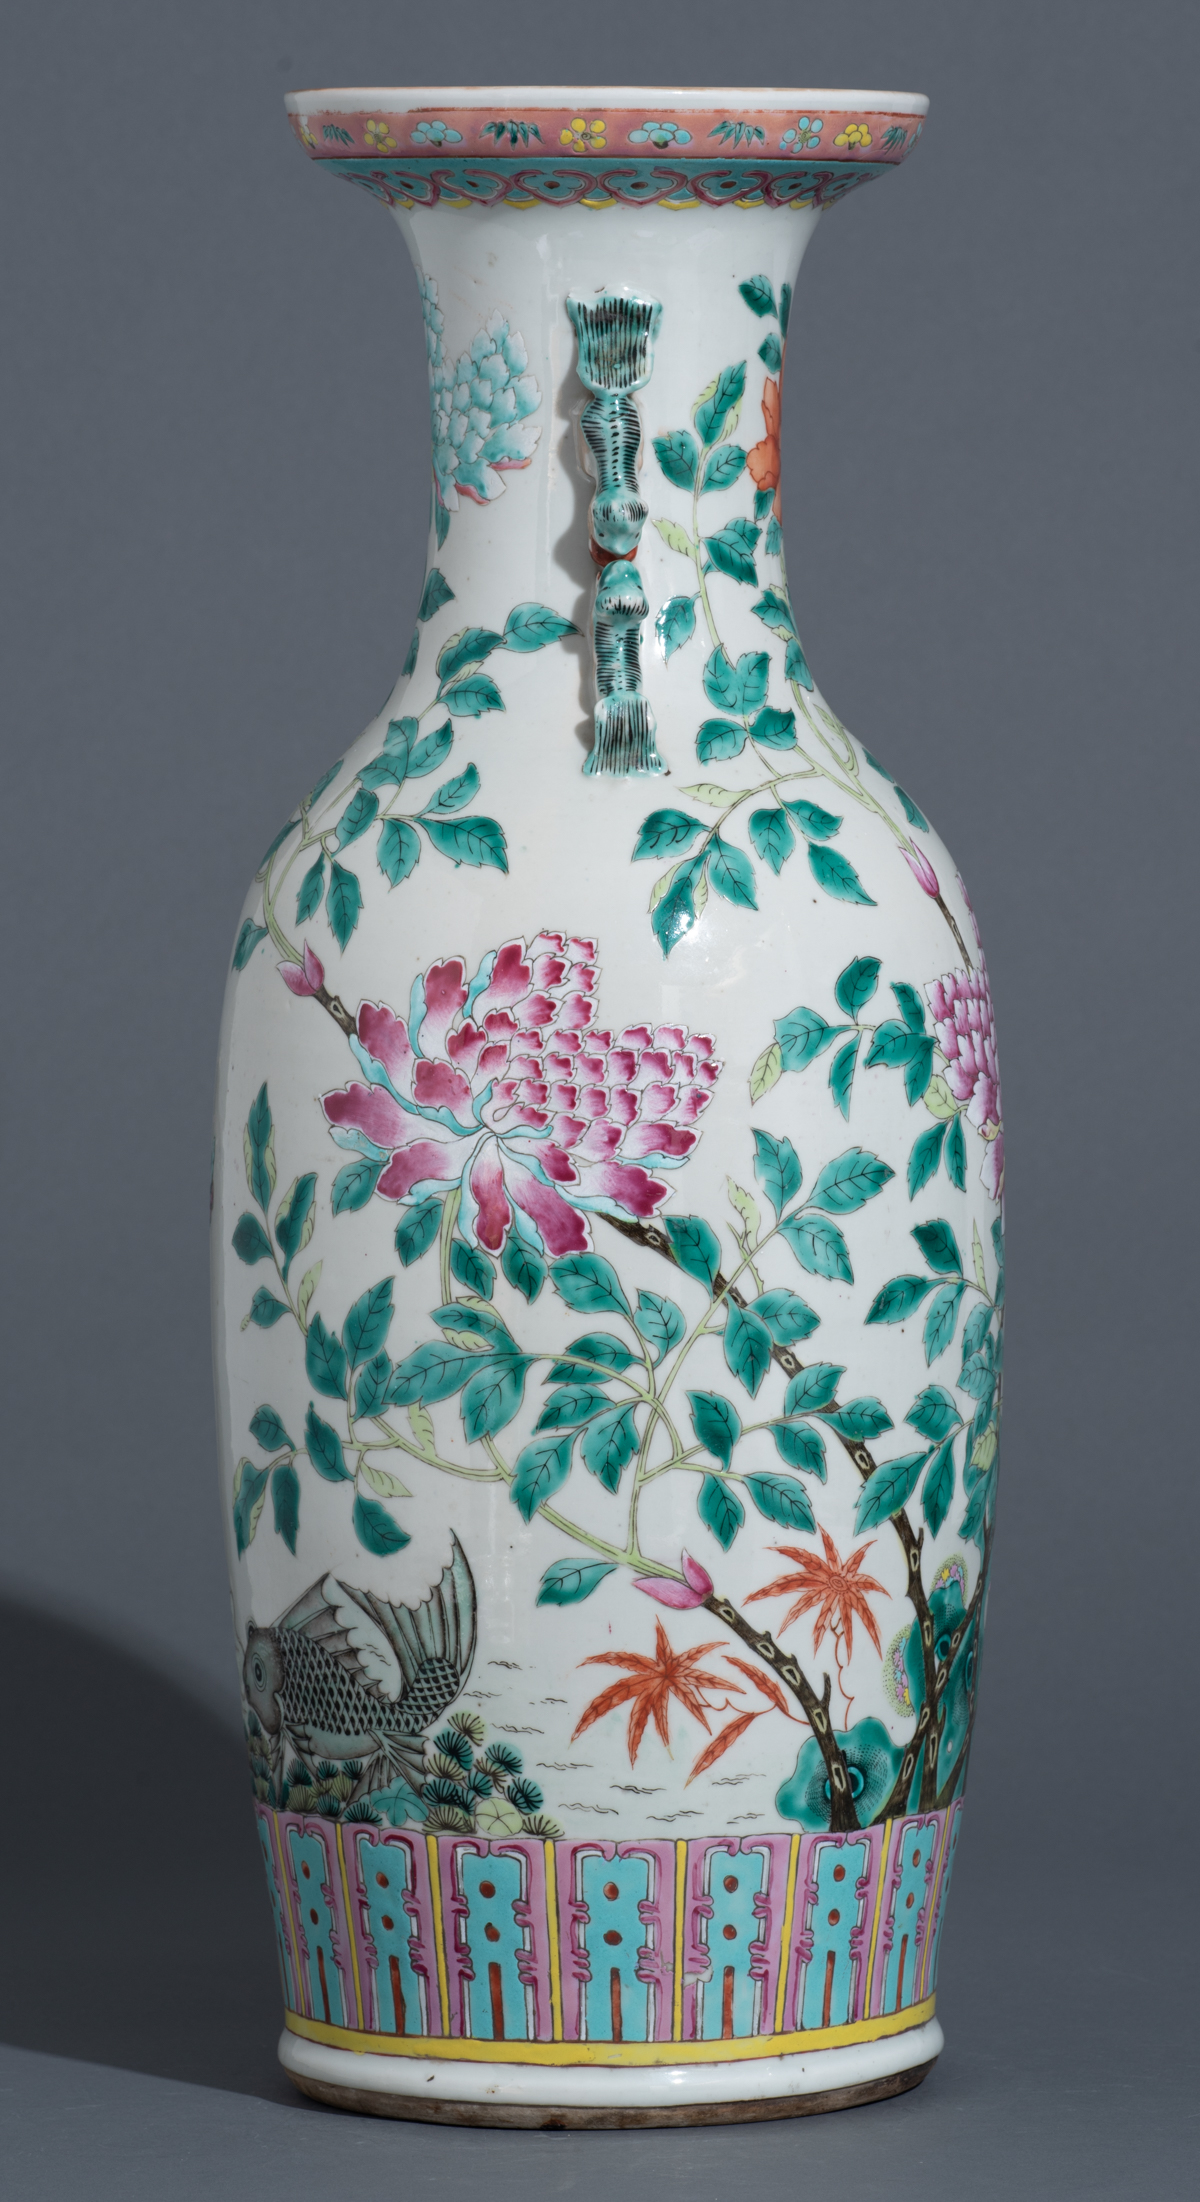 A Chinese famille rose vase, overall decorated with flowers, butterflies and carps, 19thC, H 61 cm - Image 5 of 7